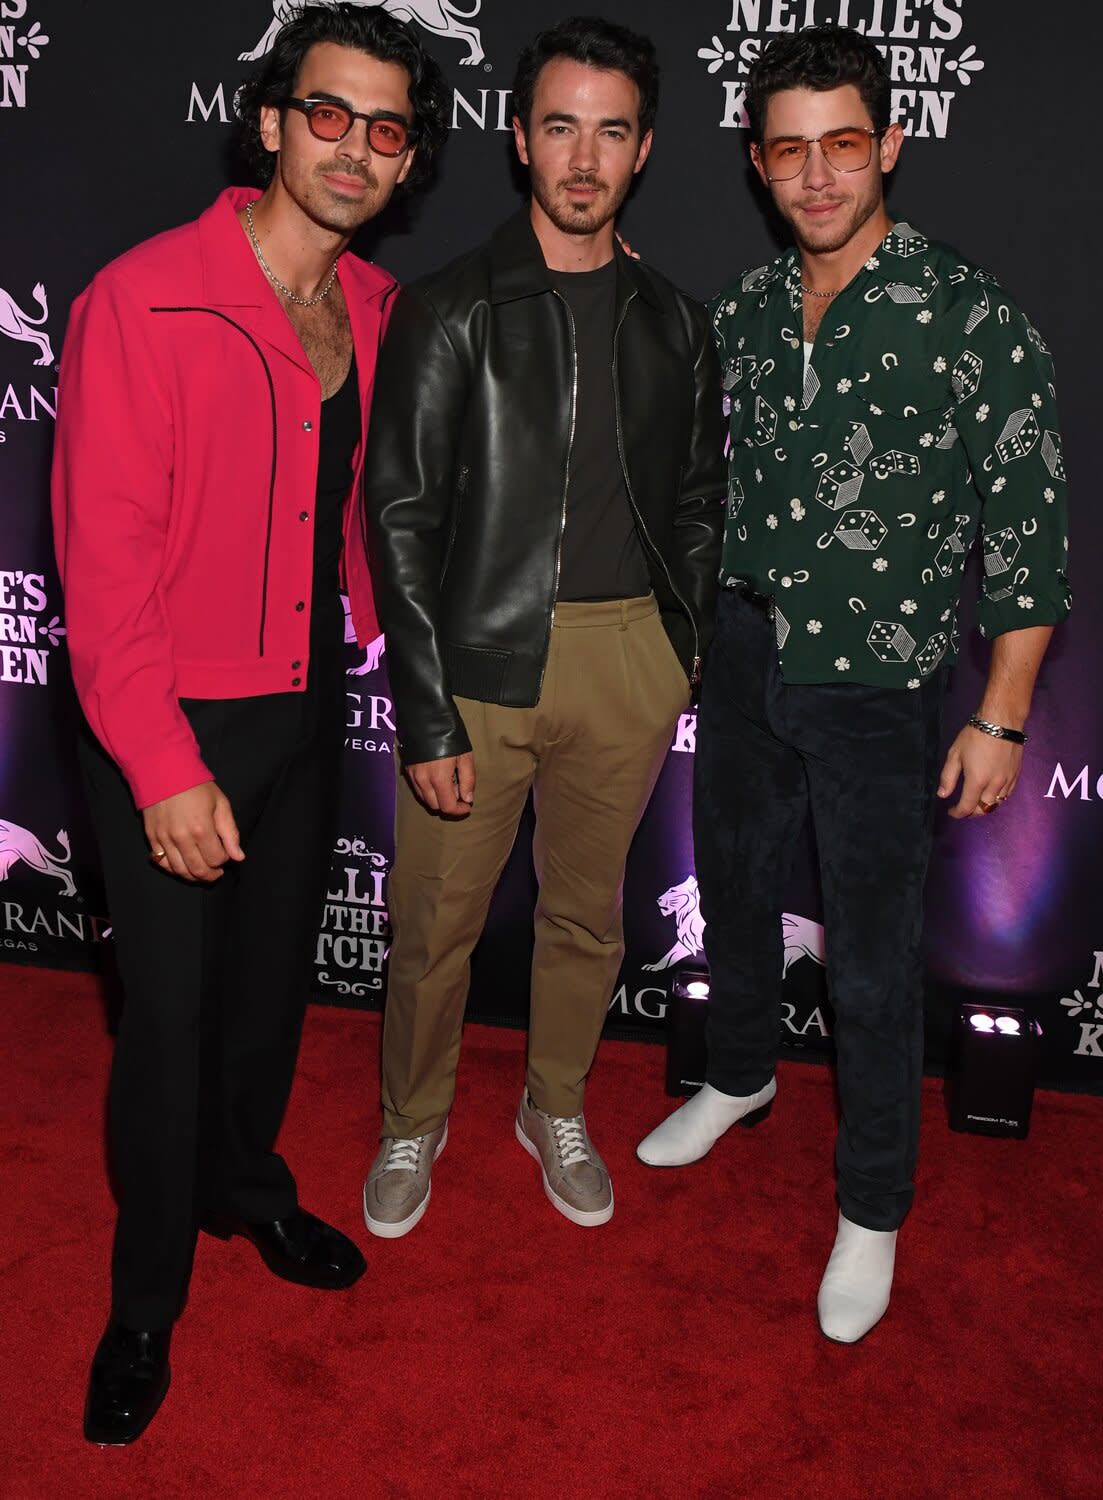 Joe Jonas, Kevin Jonas and Nick Jonas of the musical group Jonas Brothers arrive at the grand opening of their family restaurant, Nellie's Southern Kitchen at MGM Grand on June 04, 2022 in Las Vegas, Nevada.